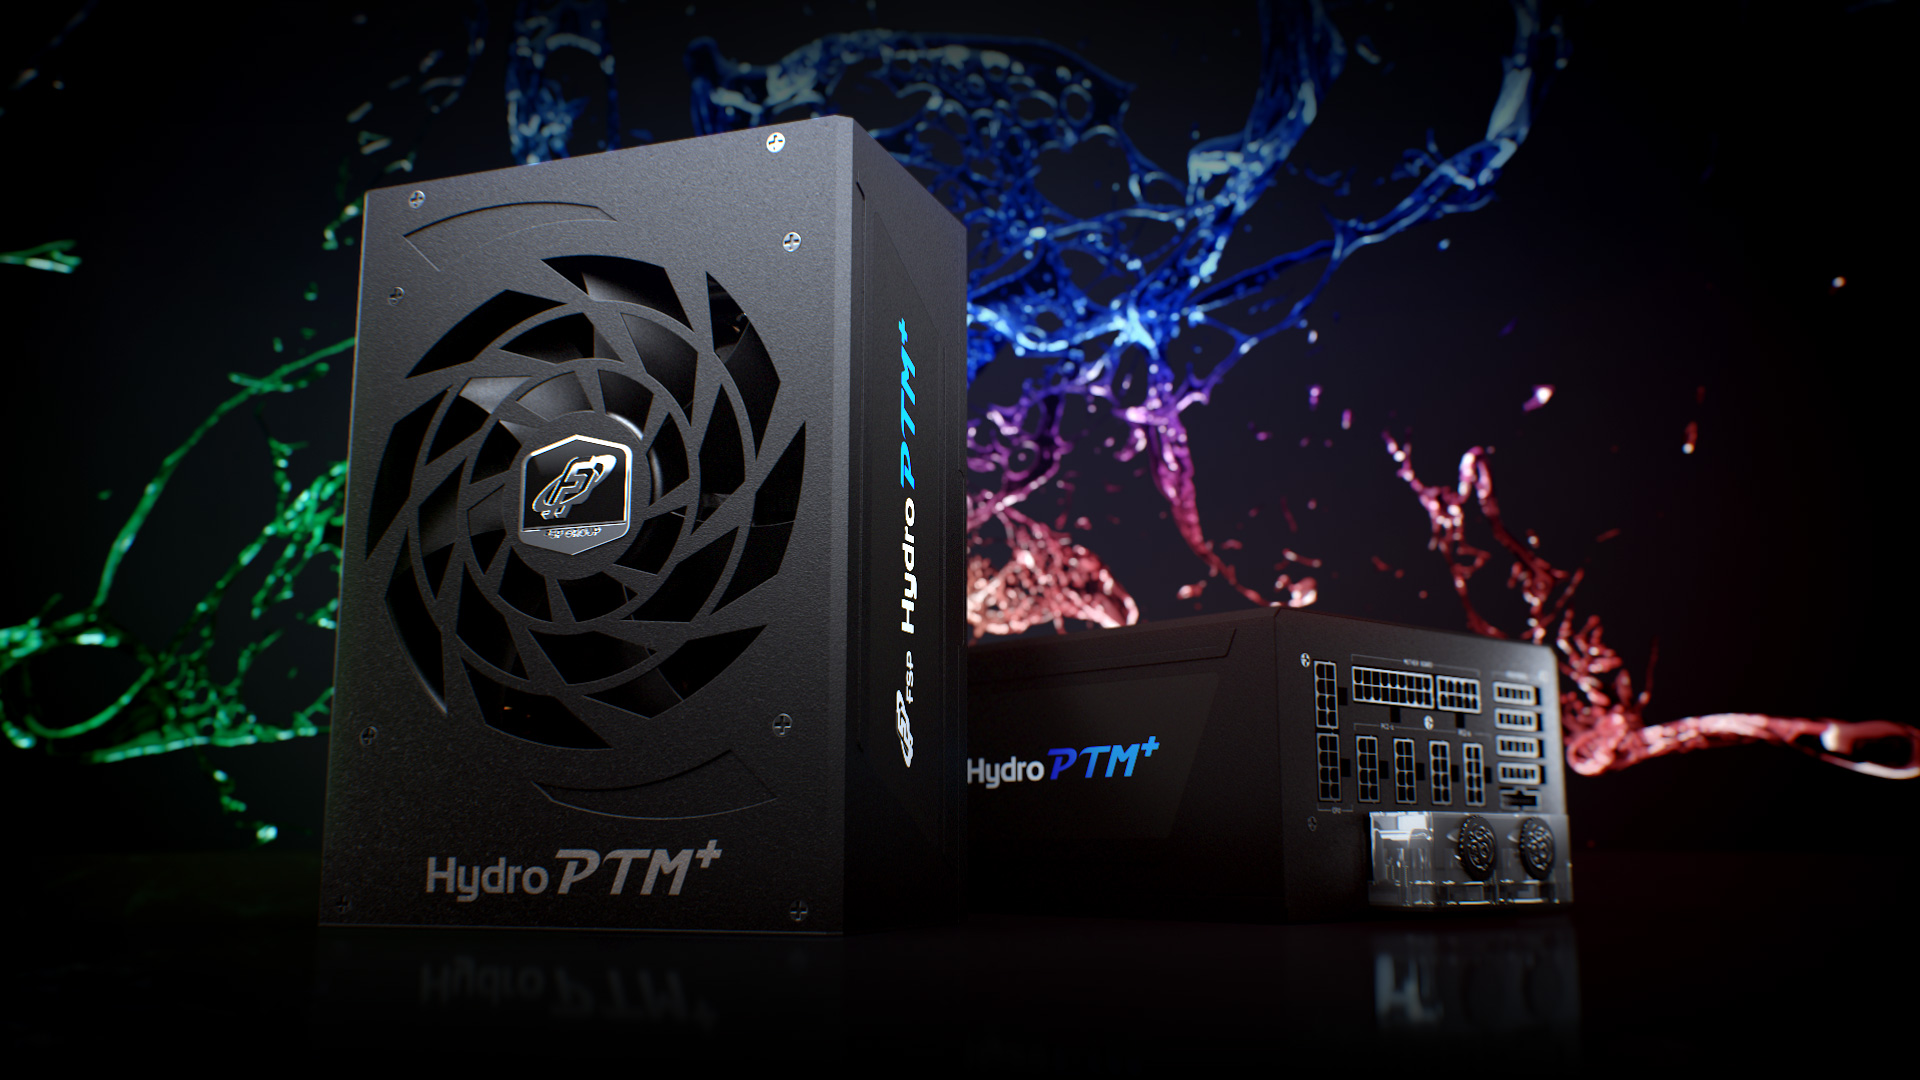 Hydro PTM+, First Liquid-Cooled Power Supply In The Market, To Boost Power Rating By 16-17%